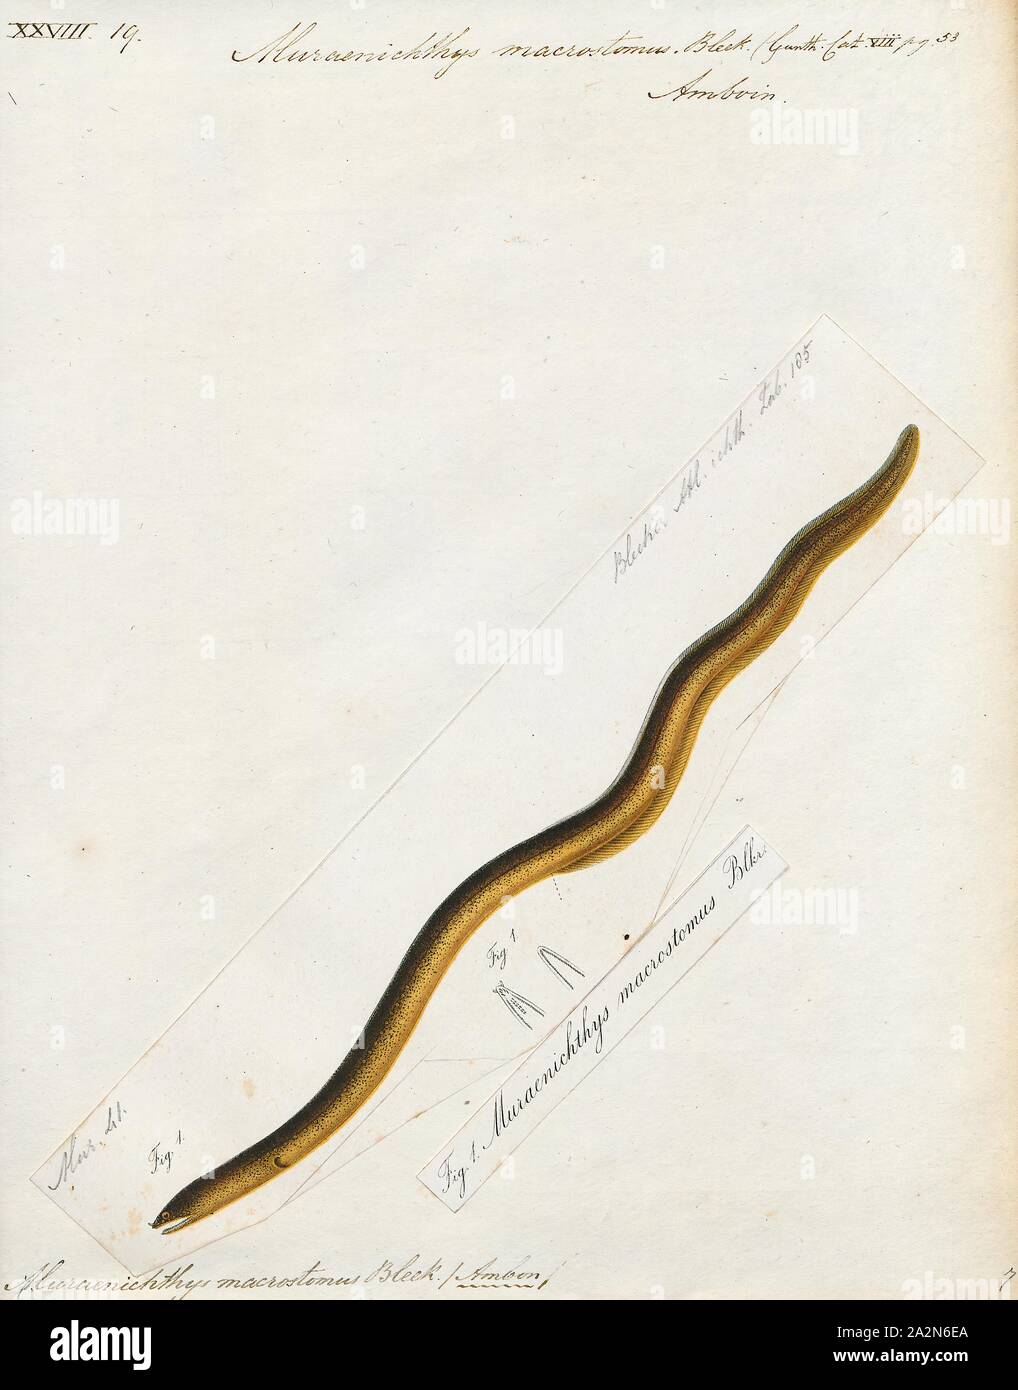 Muraenichthys macrostomus, Print, Skythrenchelys macrostoma, also known as the Large-mouth angry worm eel is a species of eel in the family Ophichthidae. It is a marine, tropical eel which is known from the Indo-Pacific Ocean, including Red Sea., 1864 Stock Photo